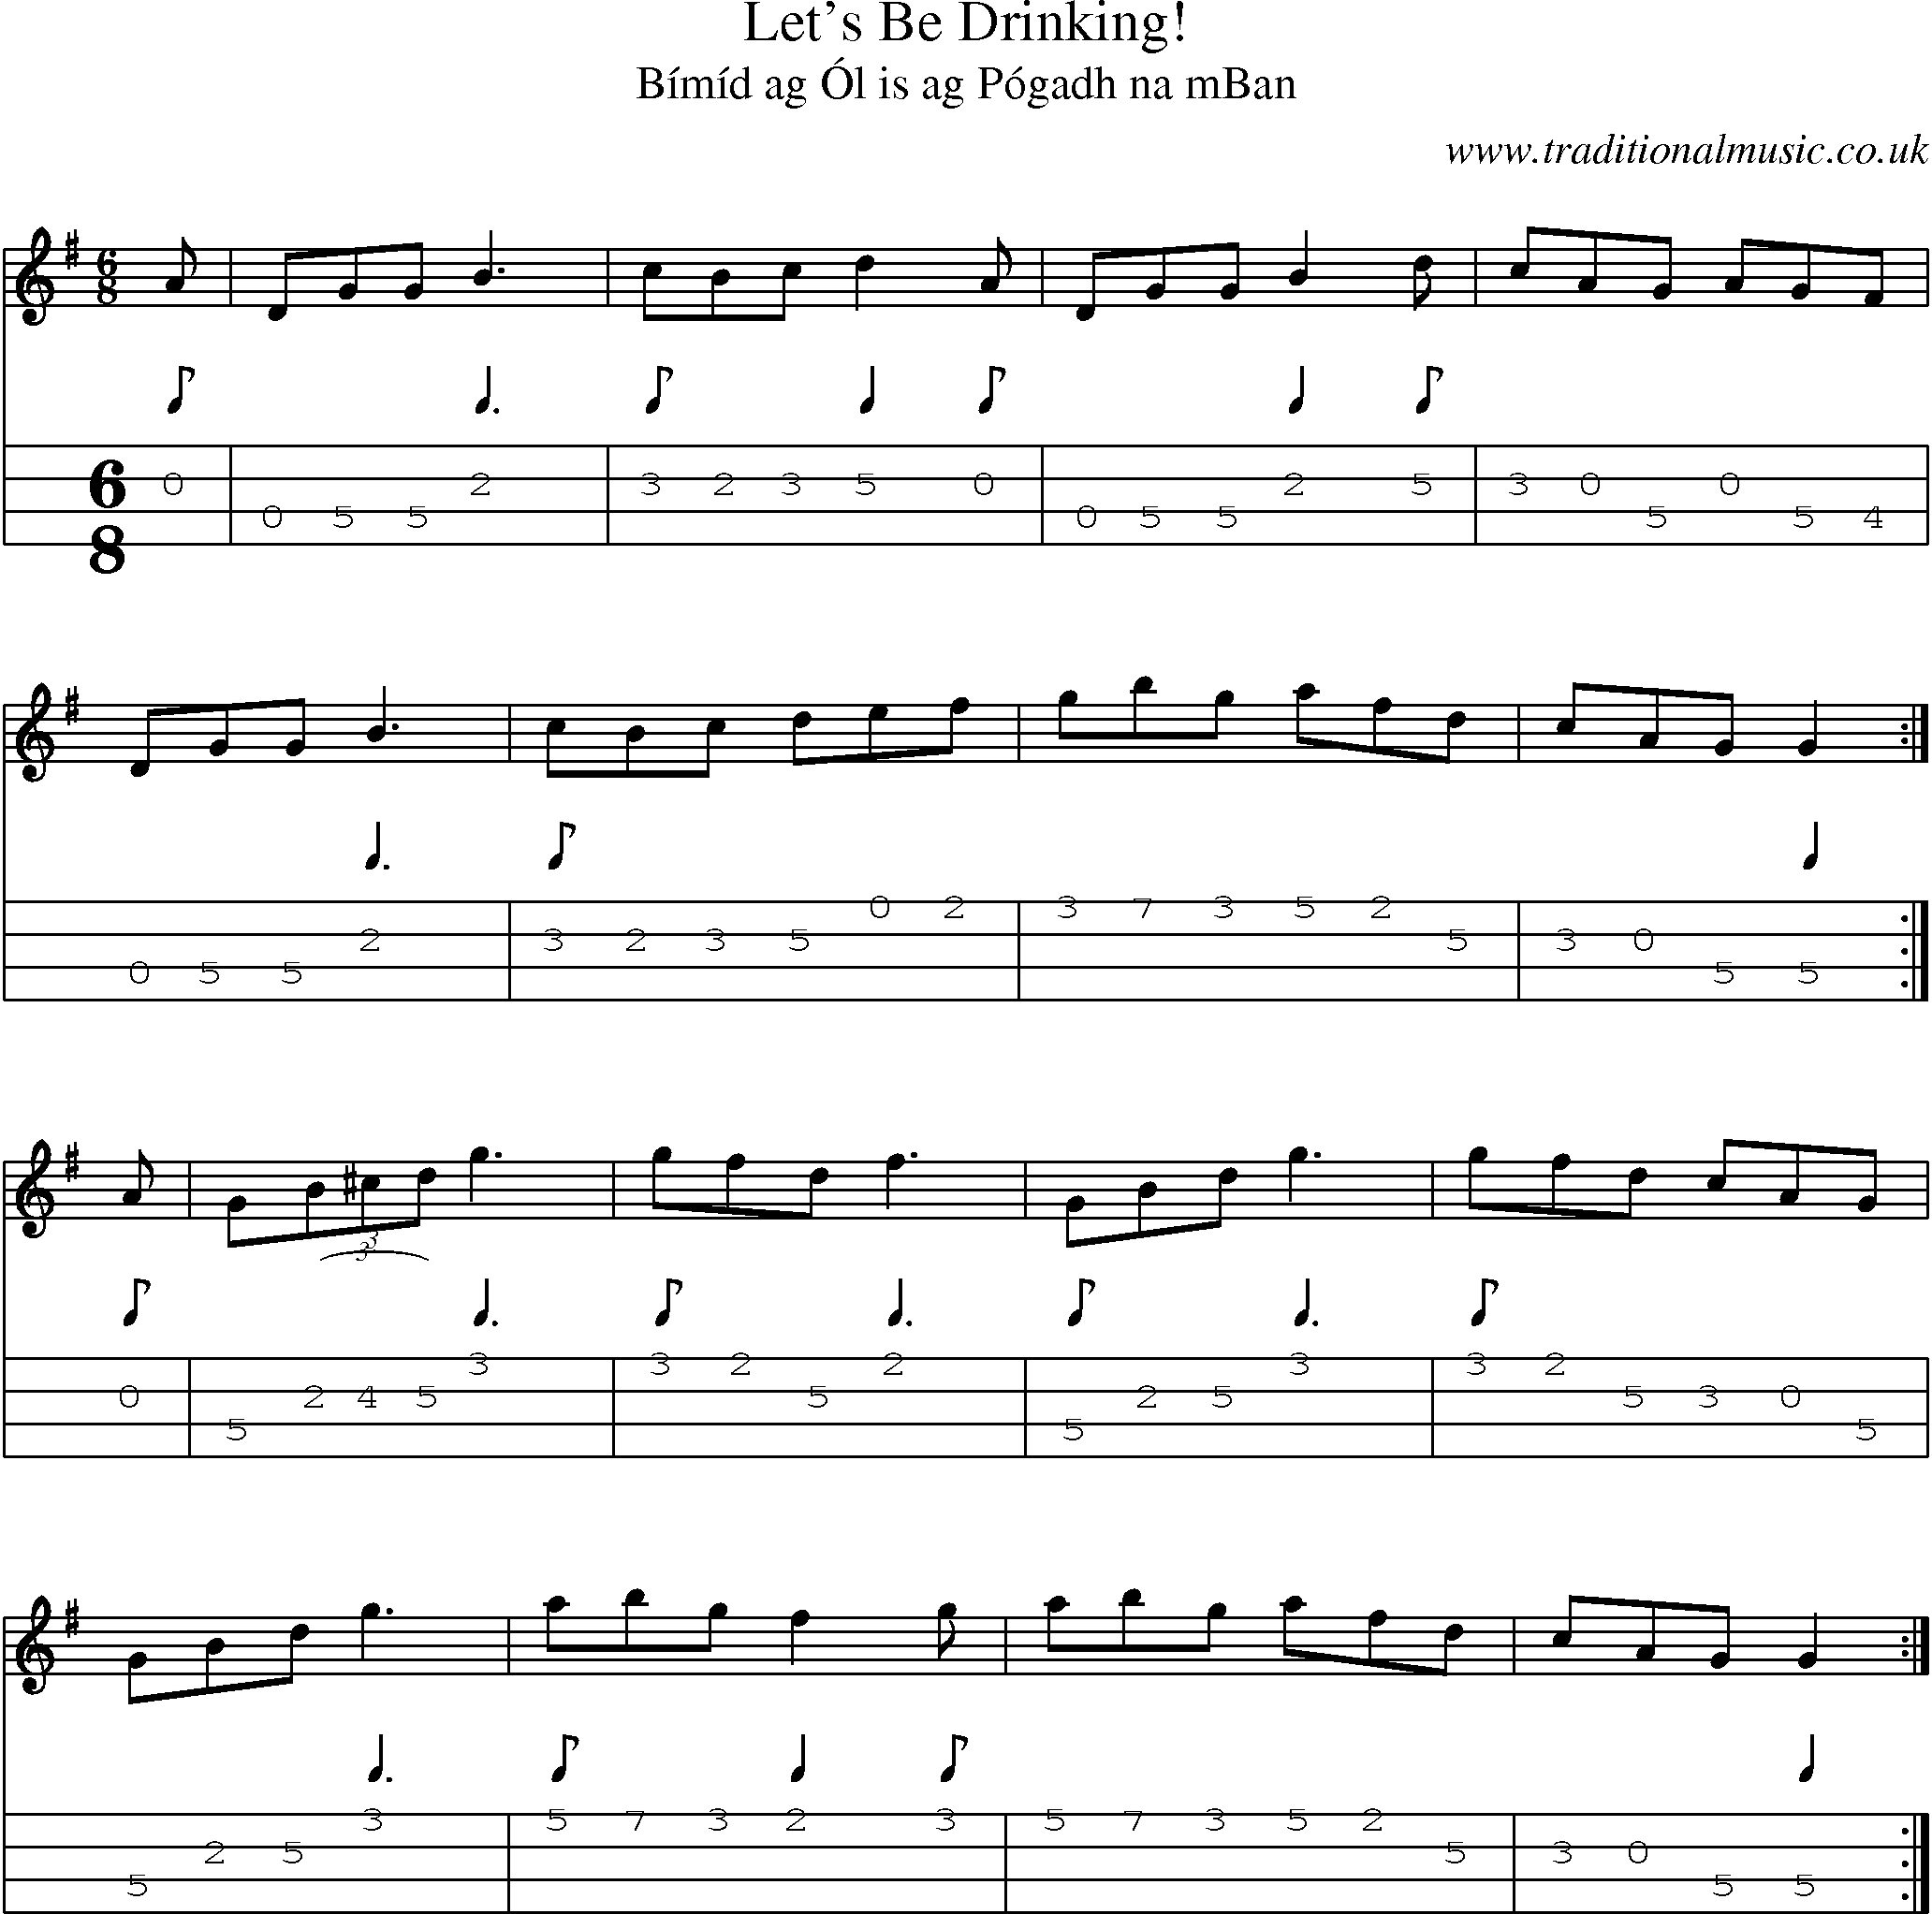 Music Score and Mandolin Tabs for Lets Be Drinking!